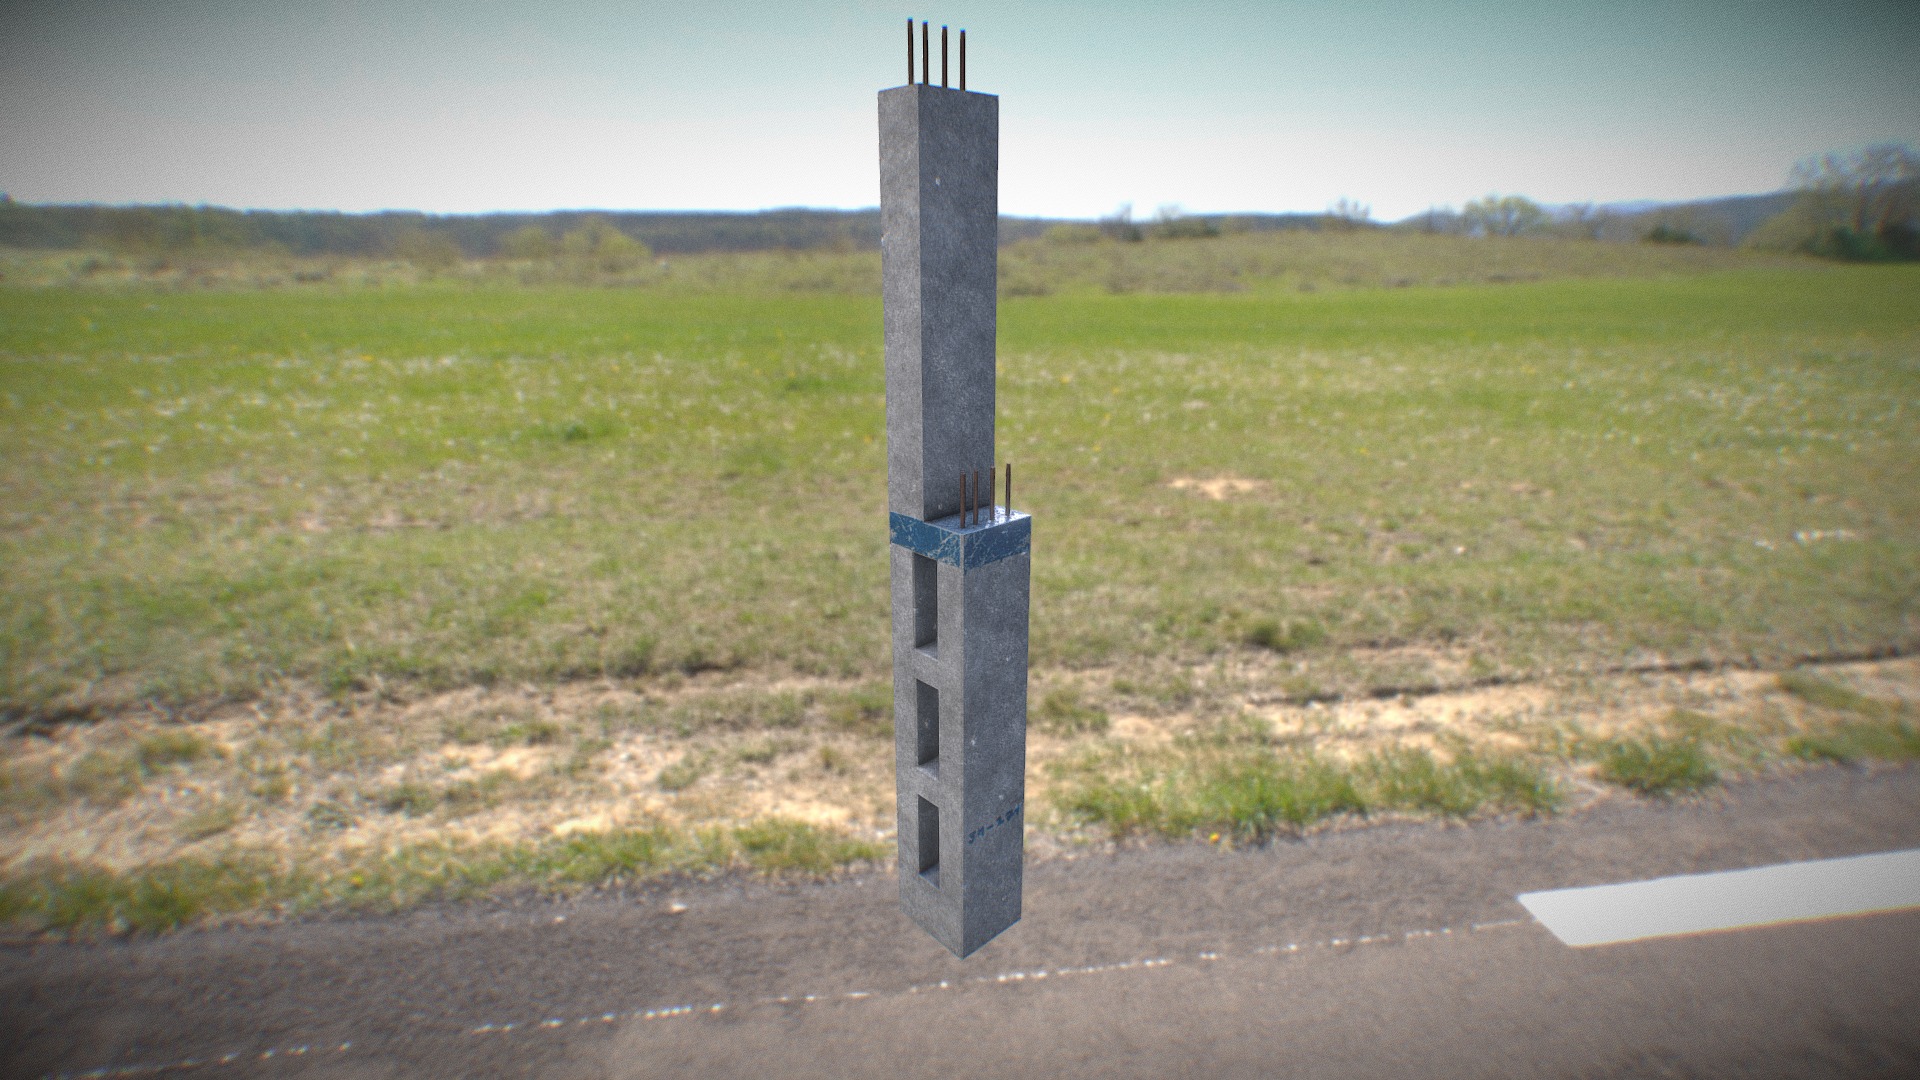 3D model Reinforced concrete column - This is a 3D model of the Reinforced concrete column. The 3D model is about a post in a field.